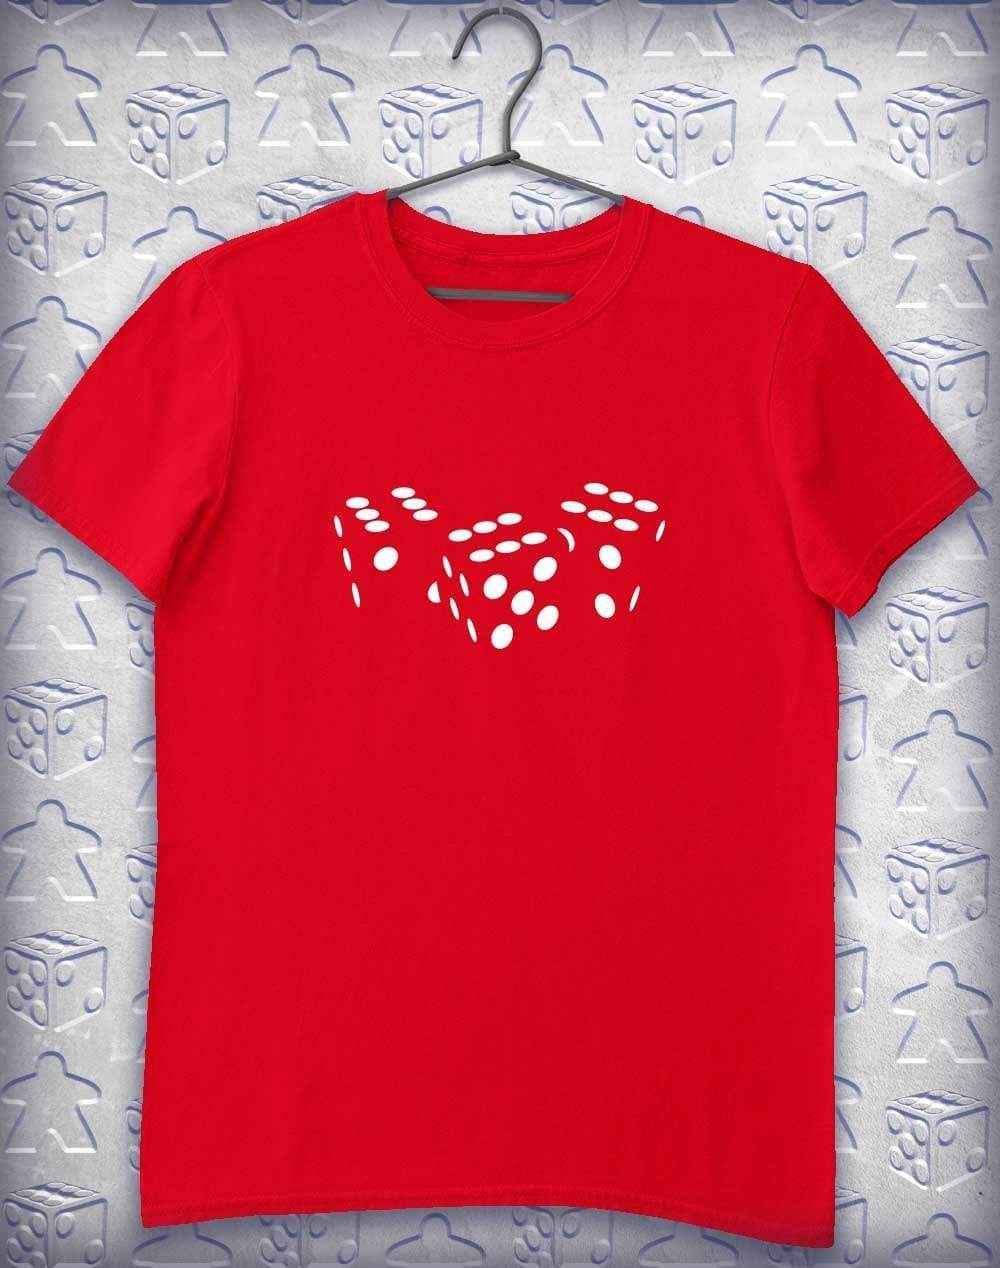 Pips Alphagamer T-Shirt S / Red  - Off World Tees